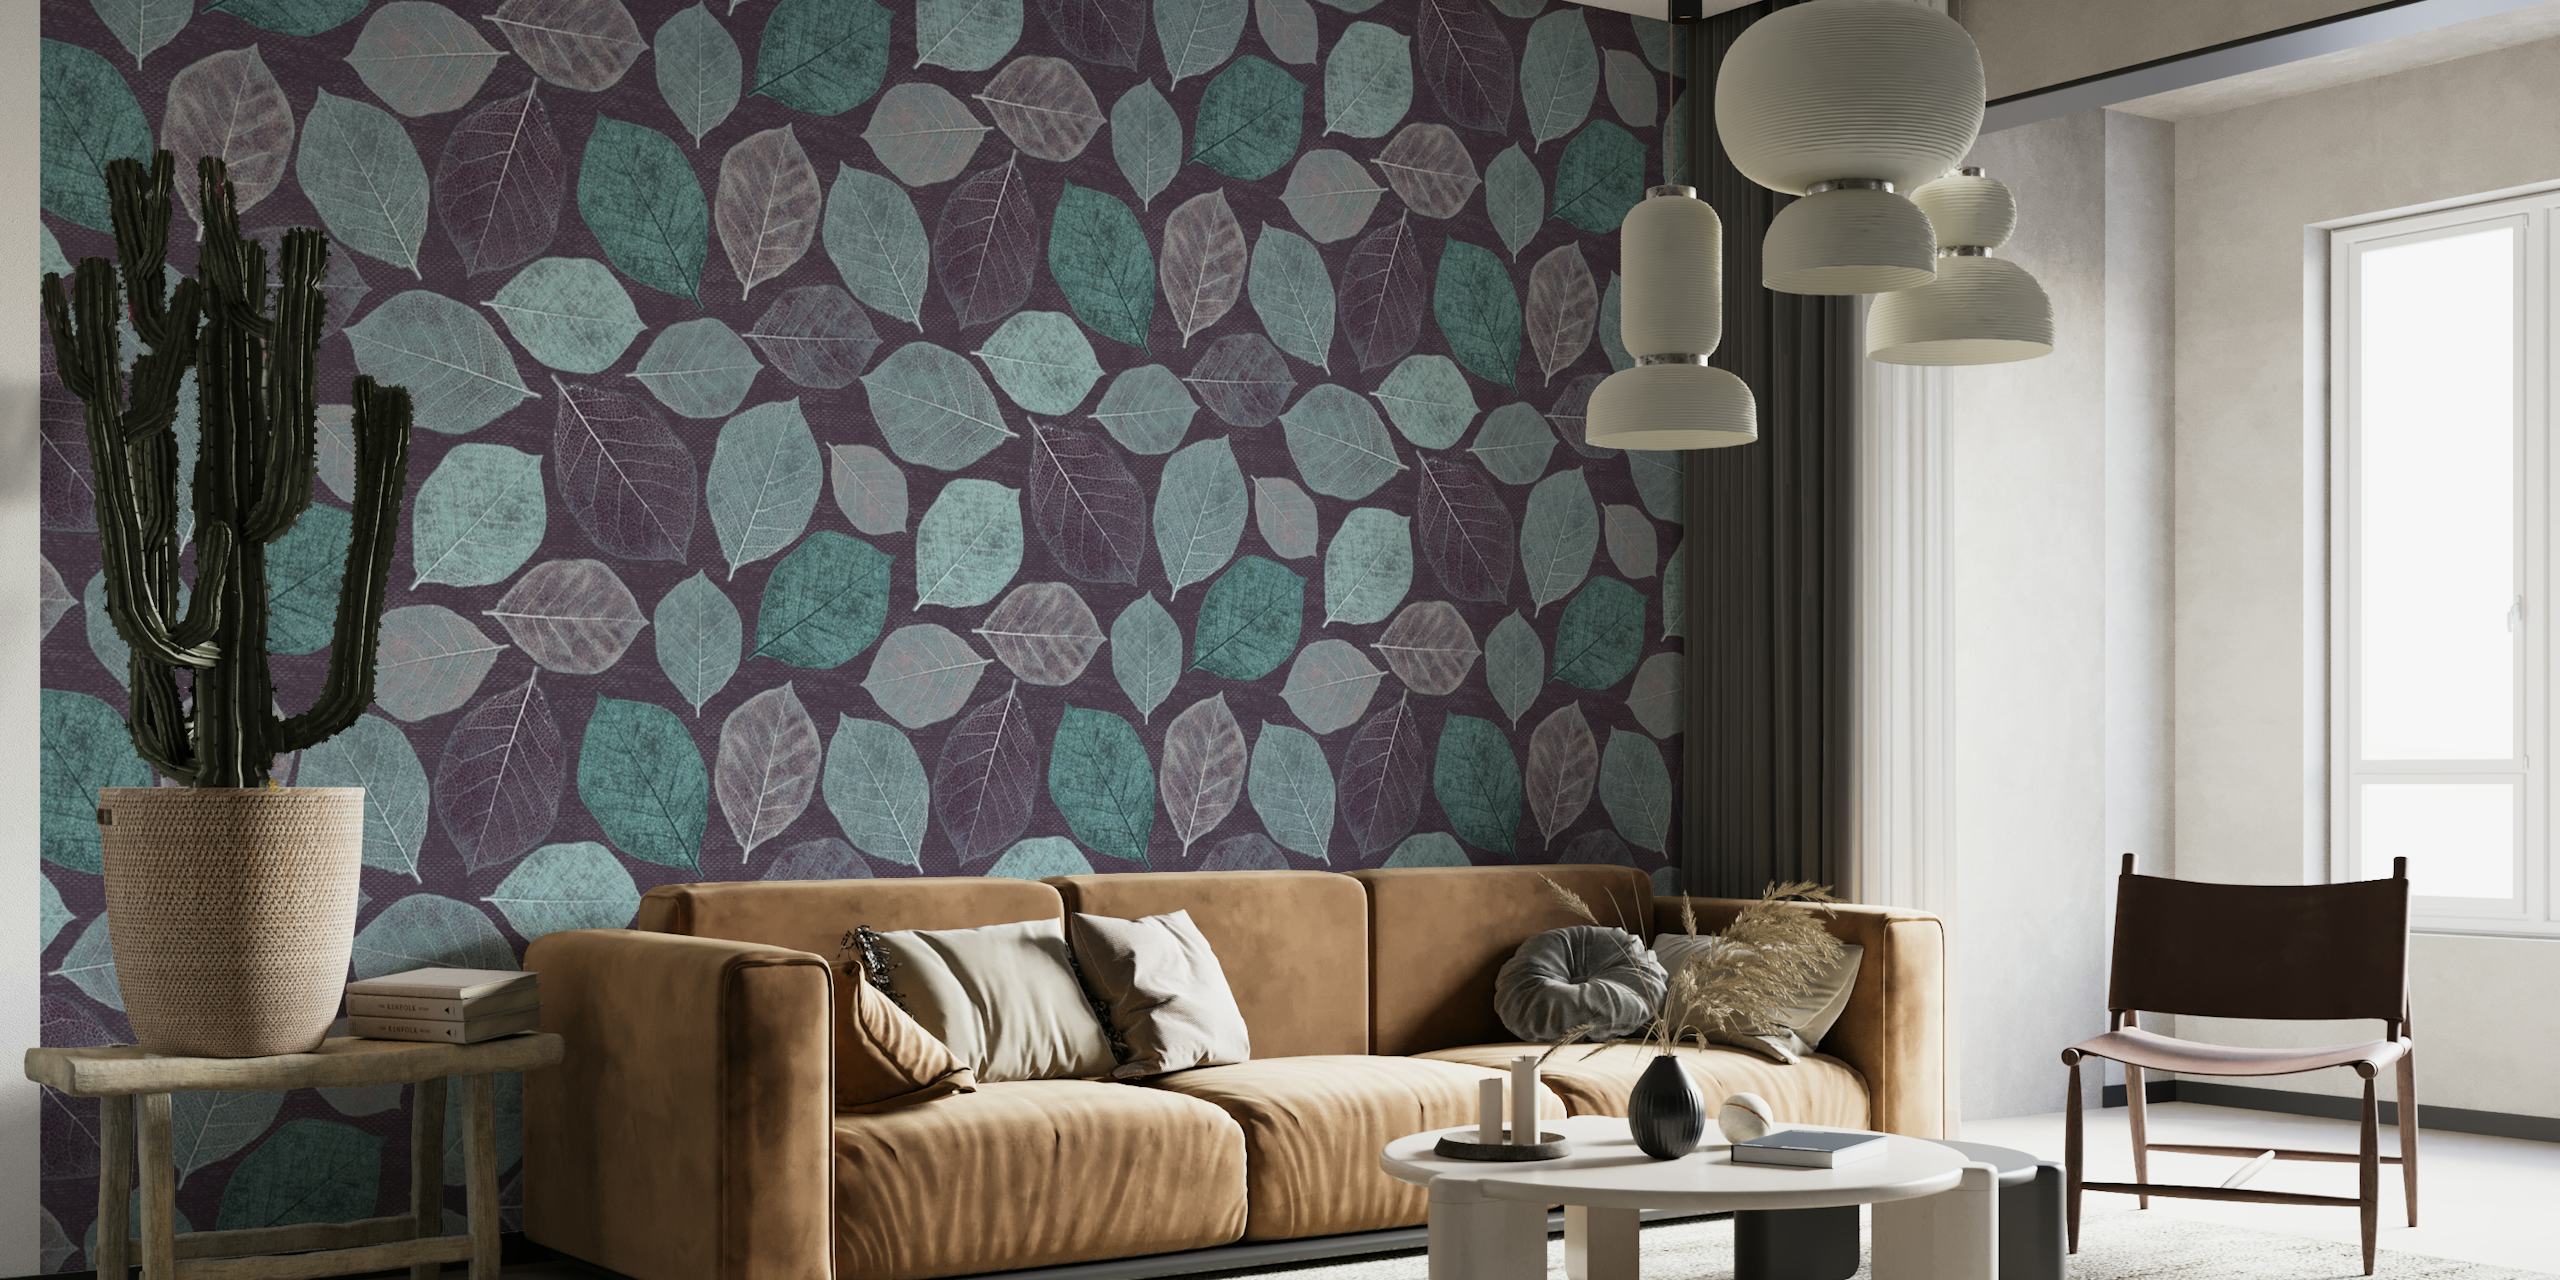 Magnolia Leaves Eggplant Aqua wall mural with a pattern of overlapping leaves in rich purple and aqua colors.